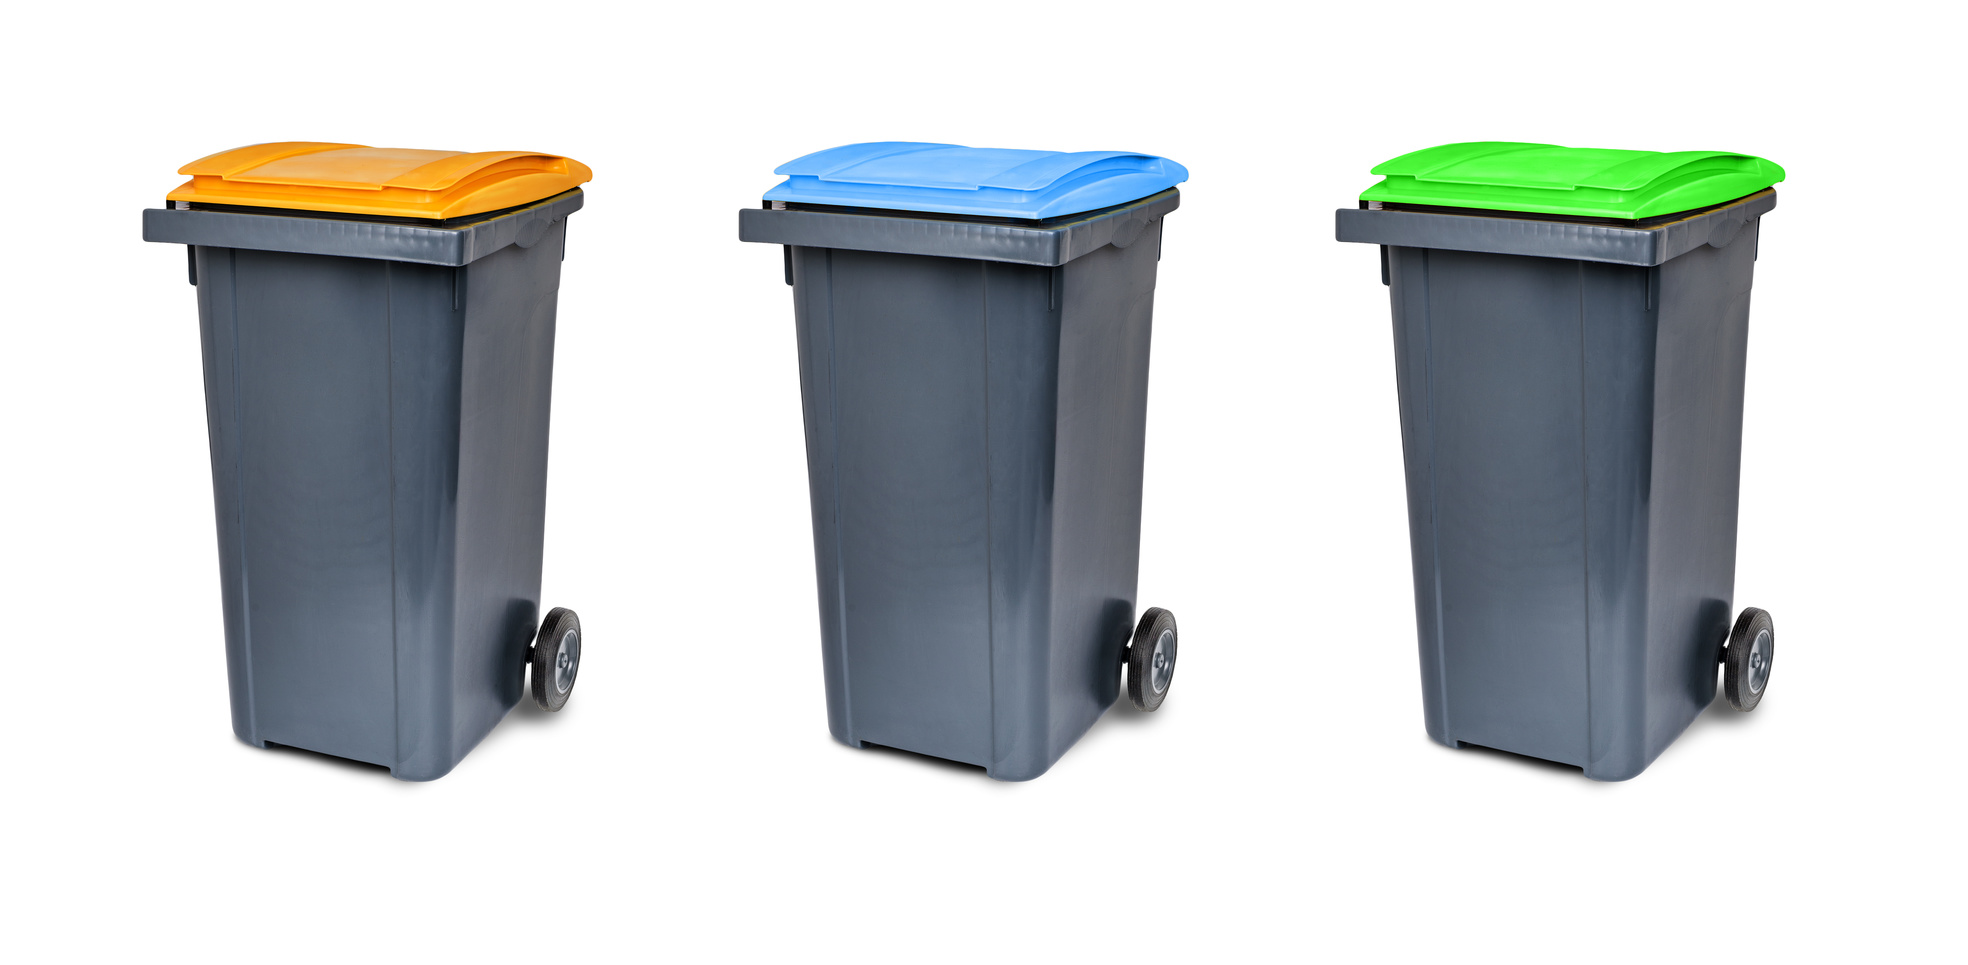 Time to bin rubbish changes?